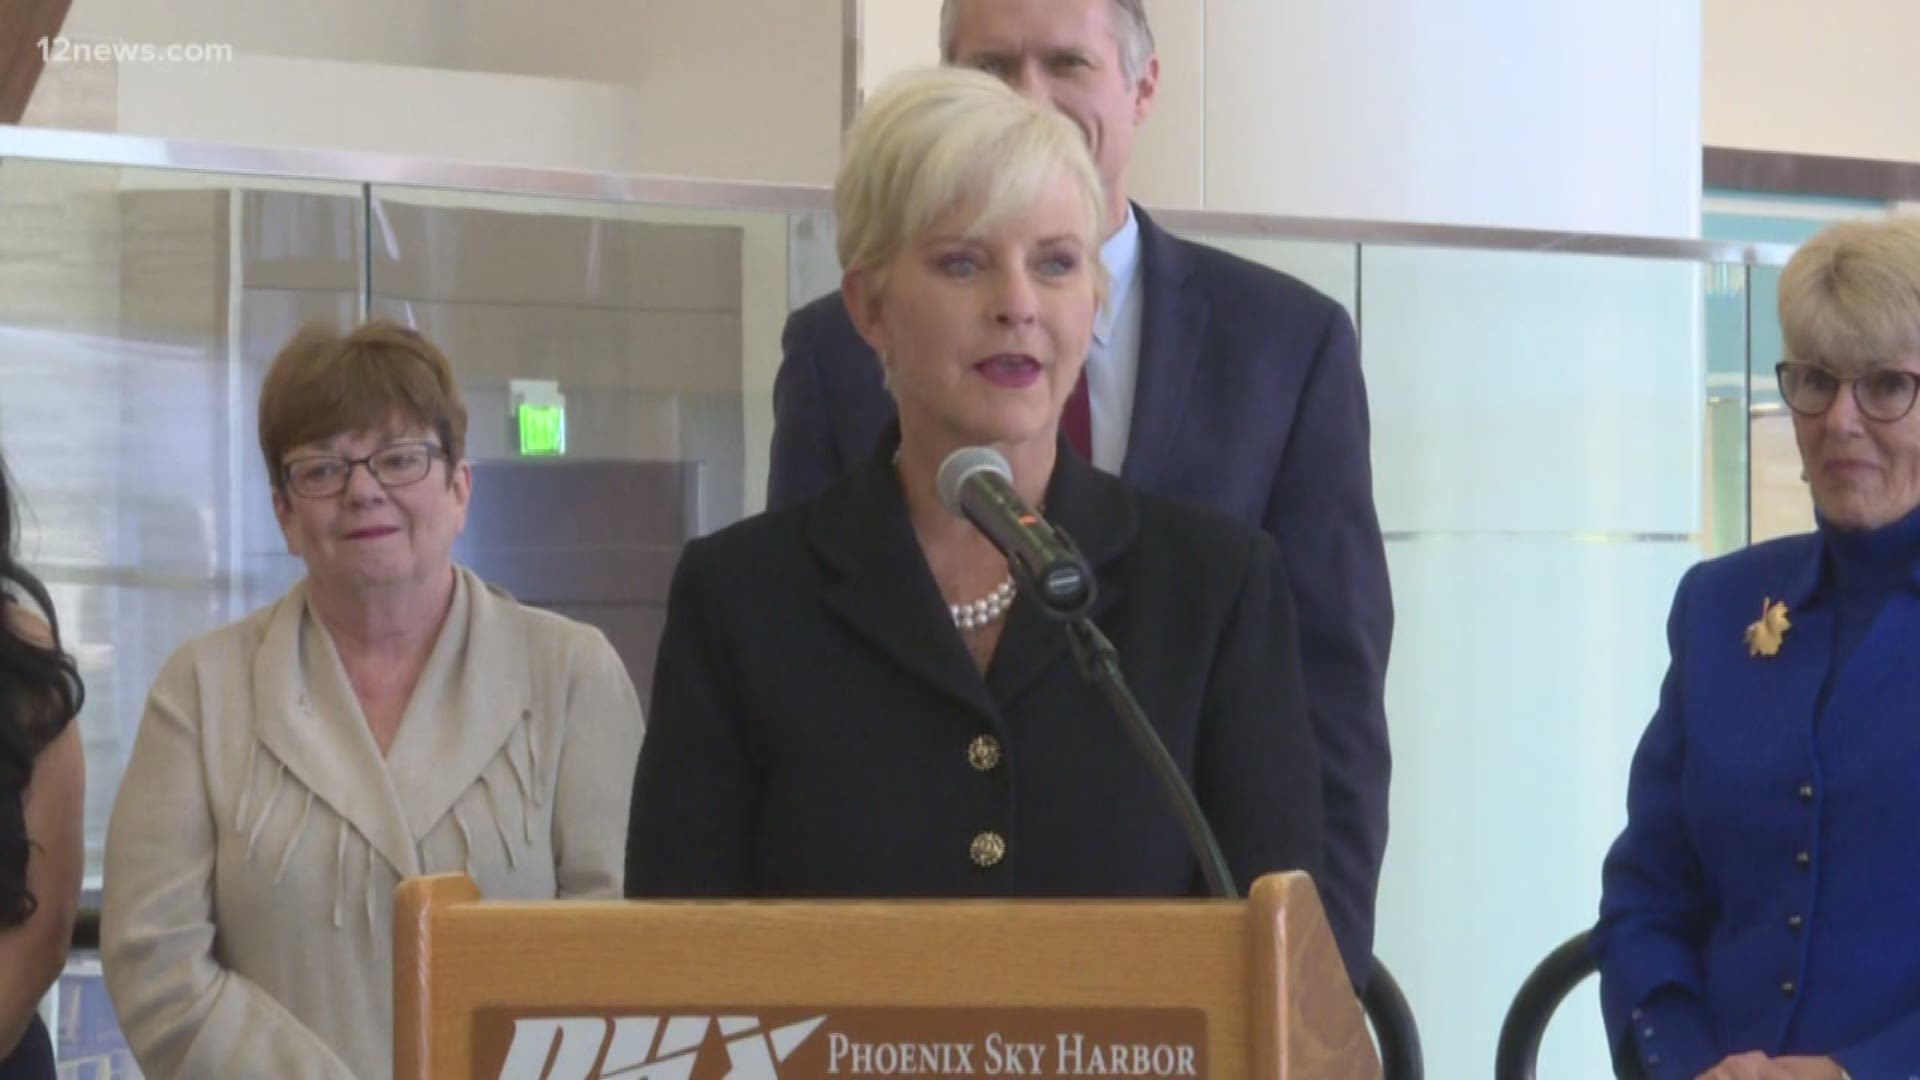 Cindy McCain says she witnessed a toddler being trafficked at Sky Harbor Airport. Phoenix PD is disputing those claims, however. Today, she tweeted an apology and says she hopes her comments are not a distraction from the issue of human trafficking.